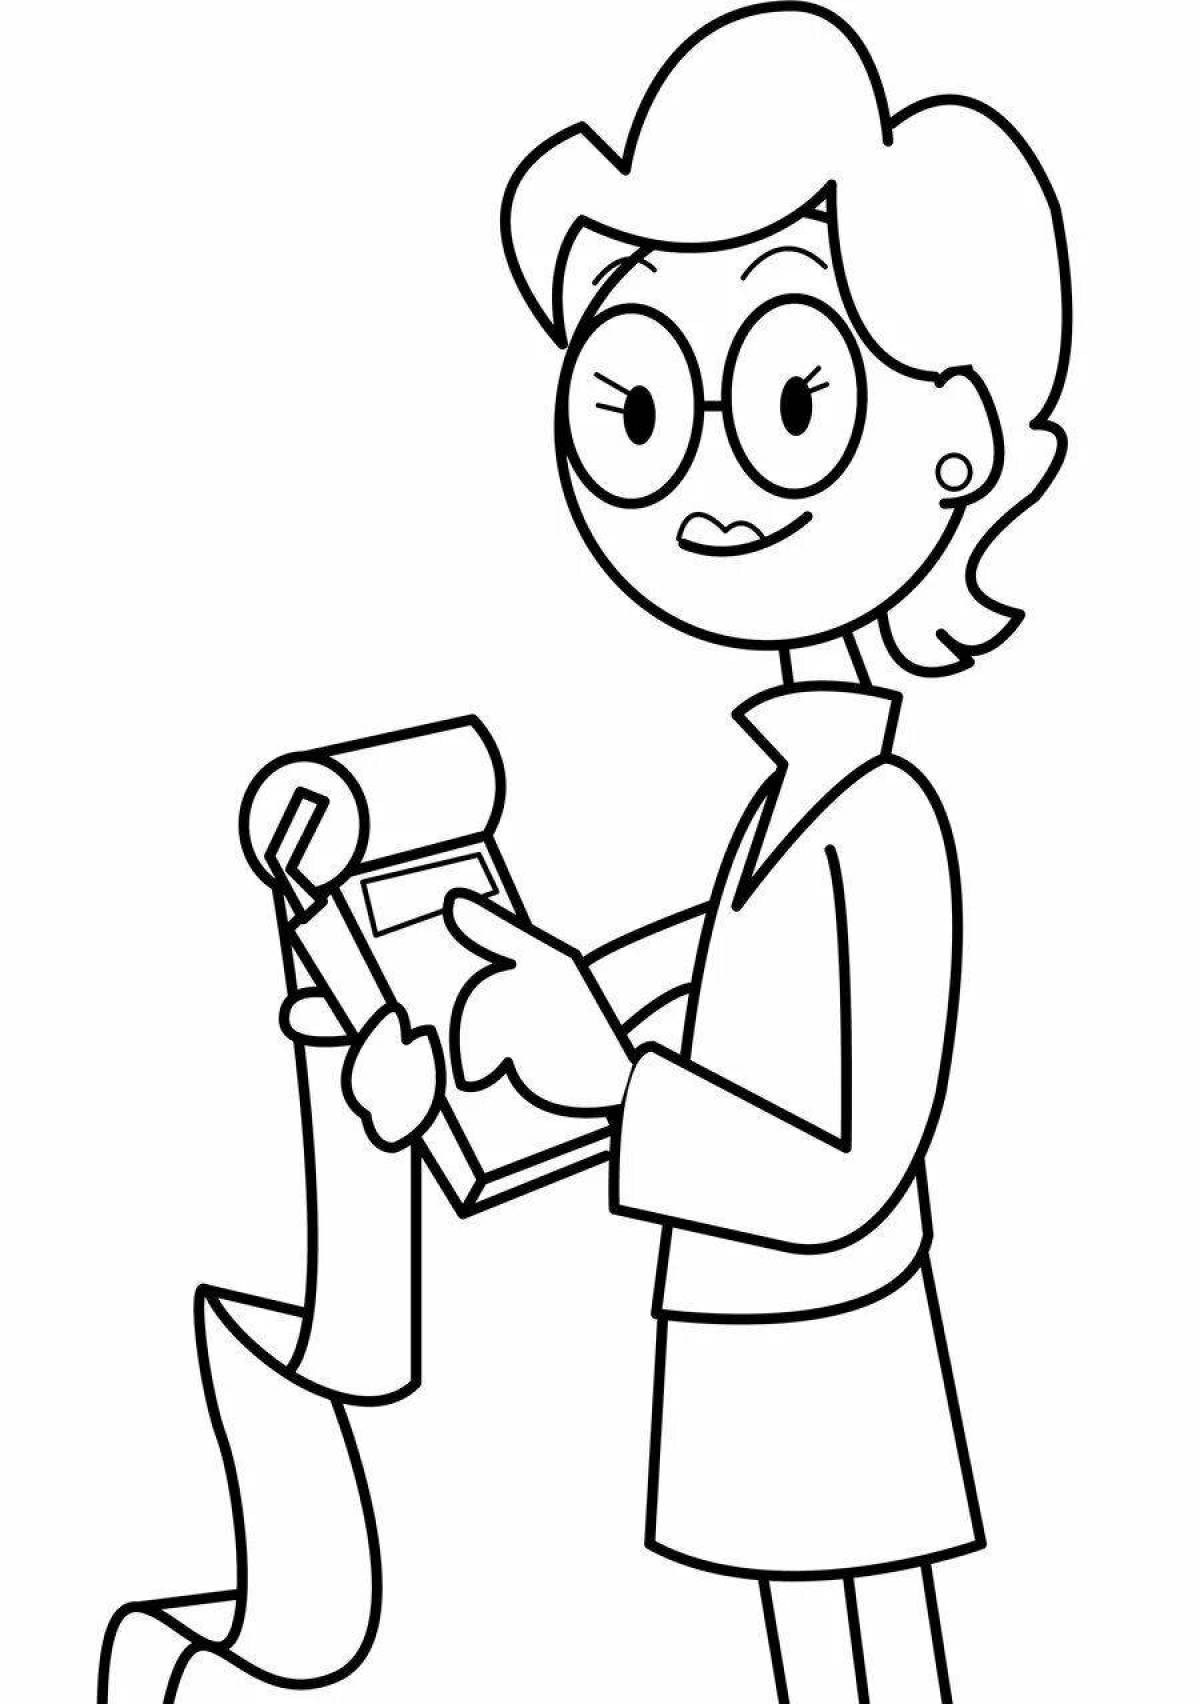 Living accountant coloring book for kids